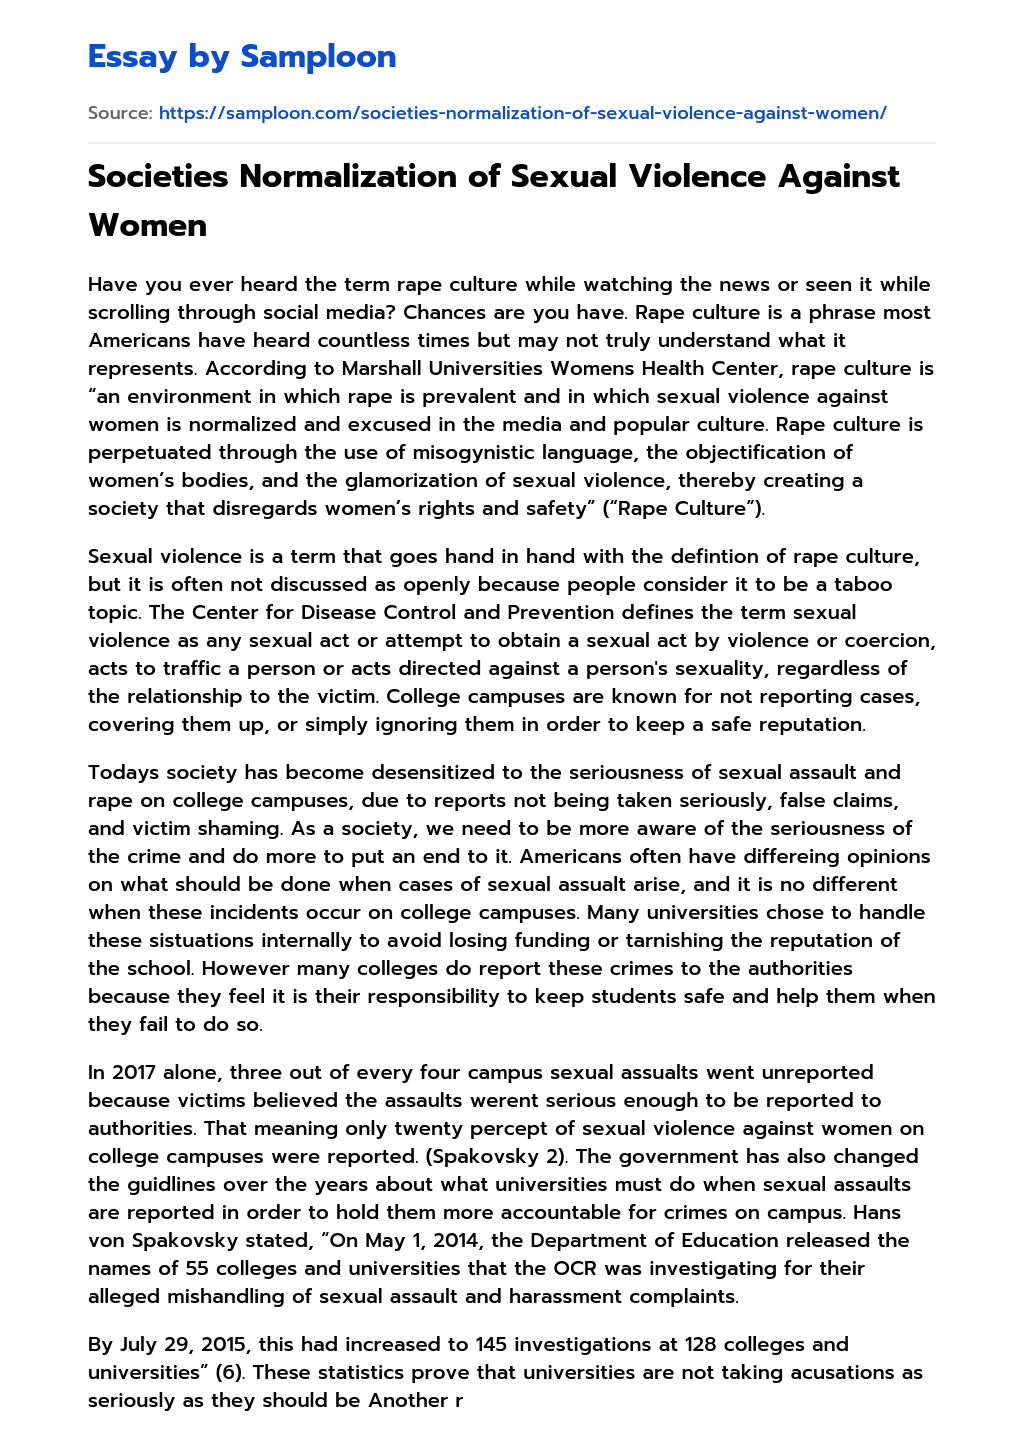 Societies Normalization of Sexual Violence Against Women essay